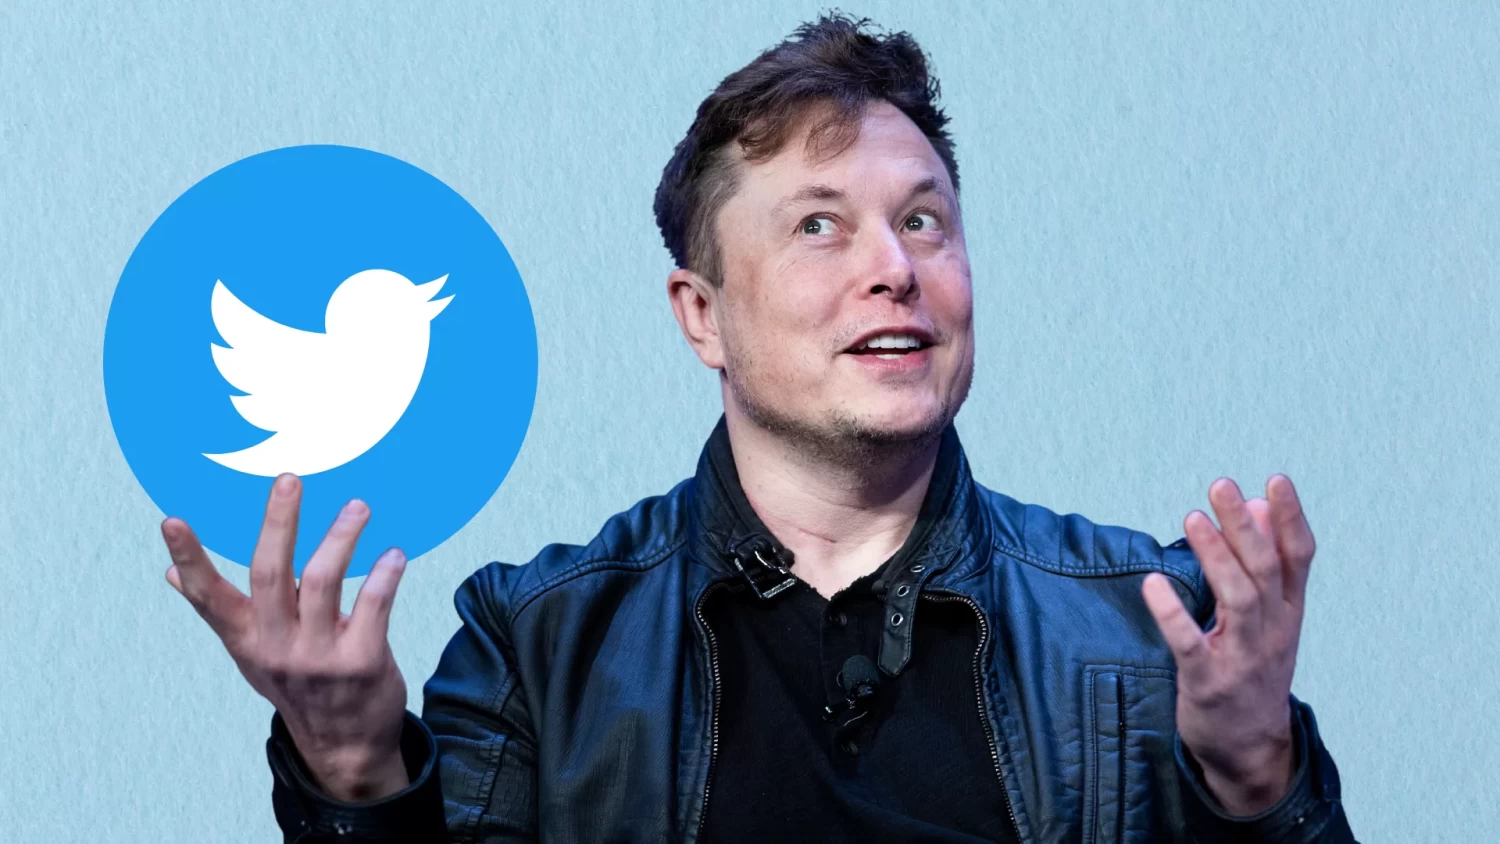 Elon Musk's bid to buy Twitter is reportedly set to be accepted soon. Musk, shown above, said he wants to buy Twitter to solve what he calls free-speech issues with the company. BRENDAN SMIALOWSKI/AFP VIA GETTY IMAGES AND CANVA